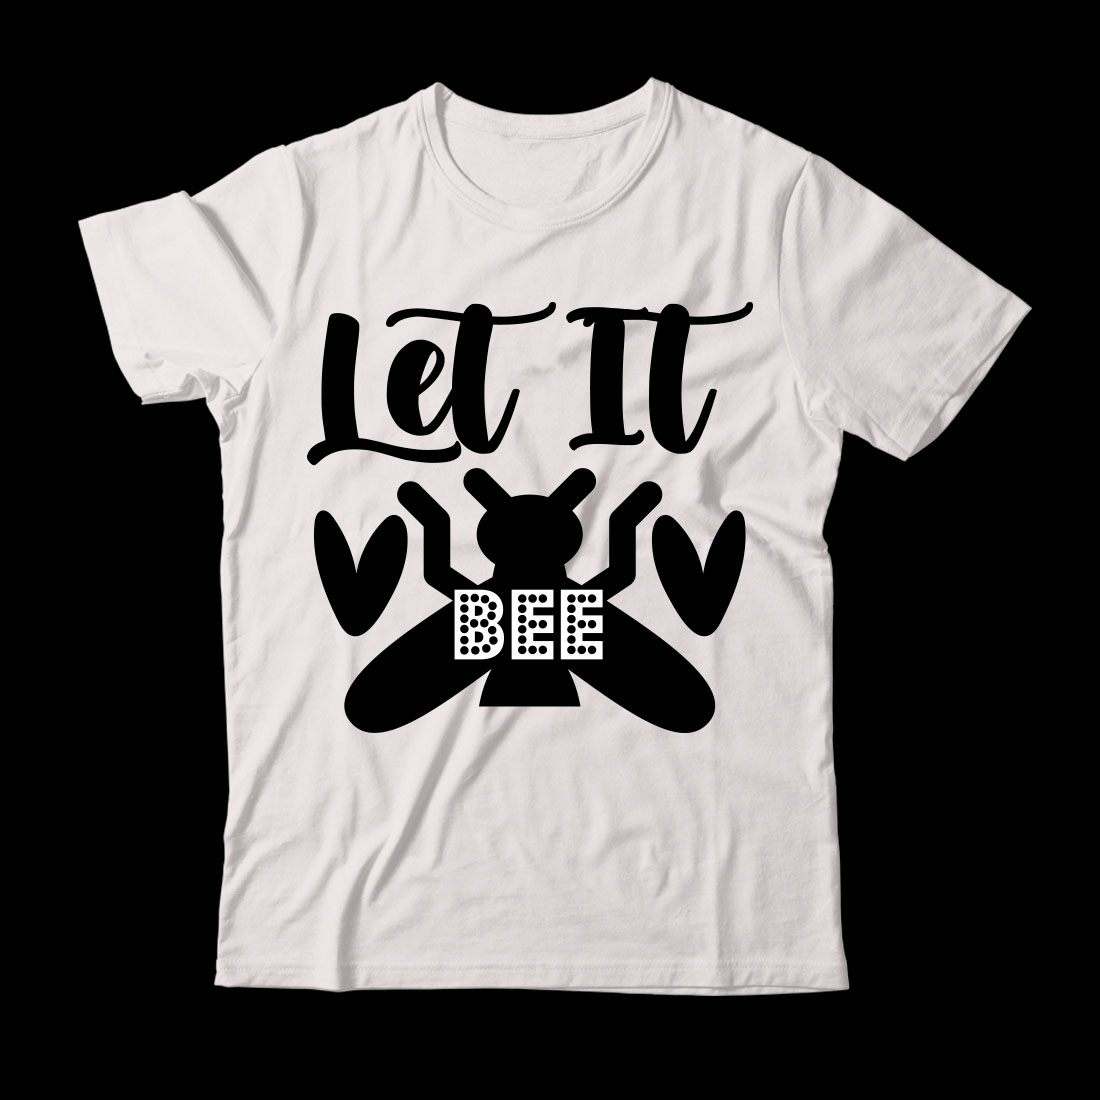 White t - shirt with the words let it fly on it.